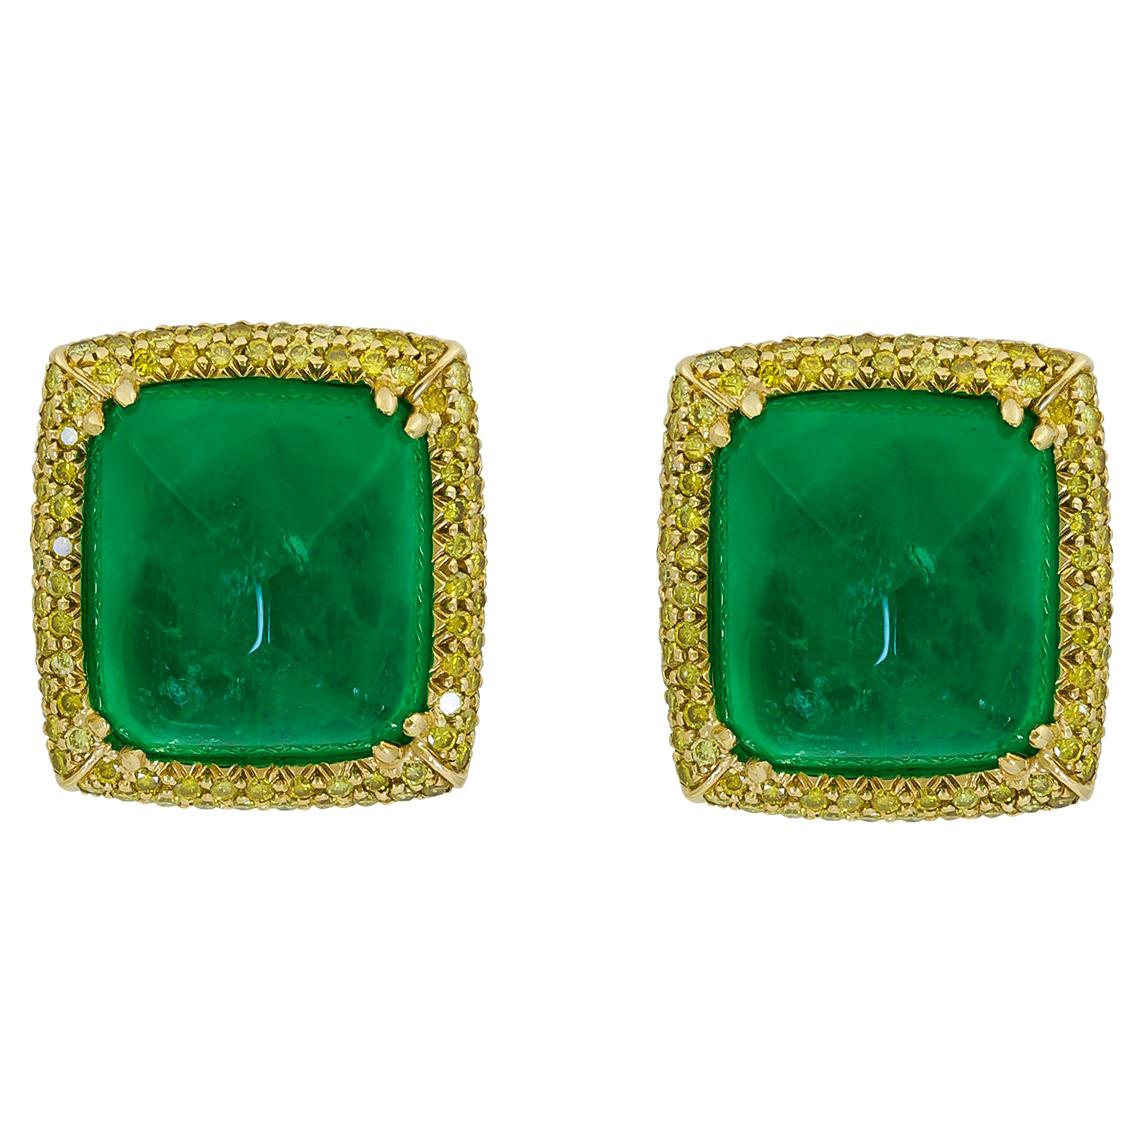 27.38 Carat Sugarloaf Cabochon Emerald and Yellow Diamond Earrings